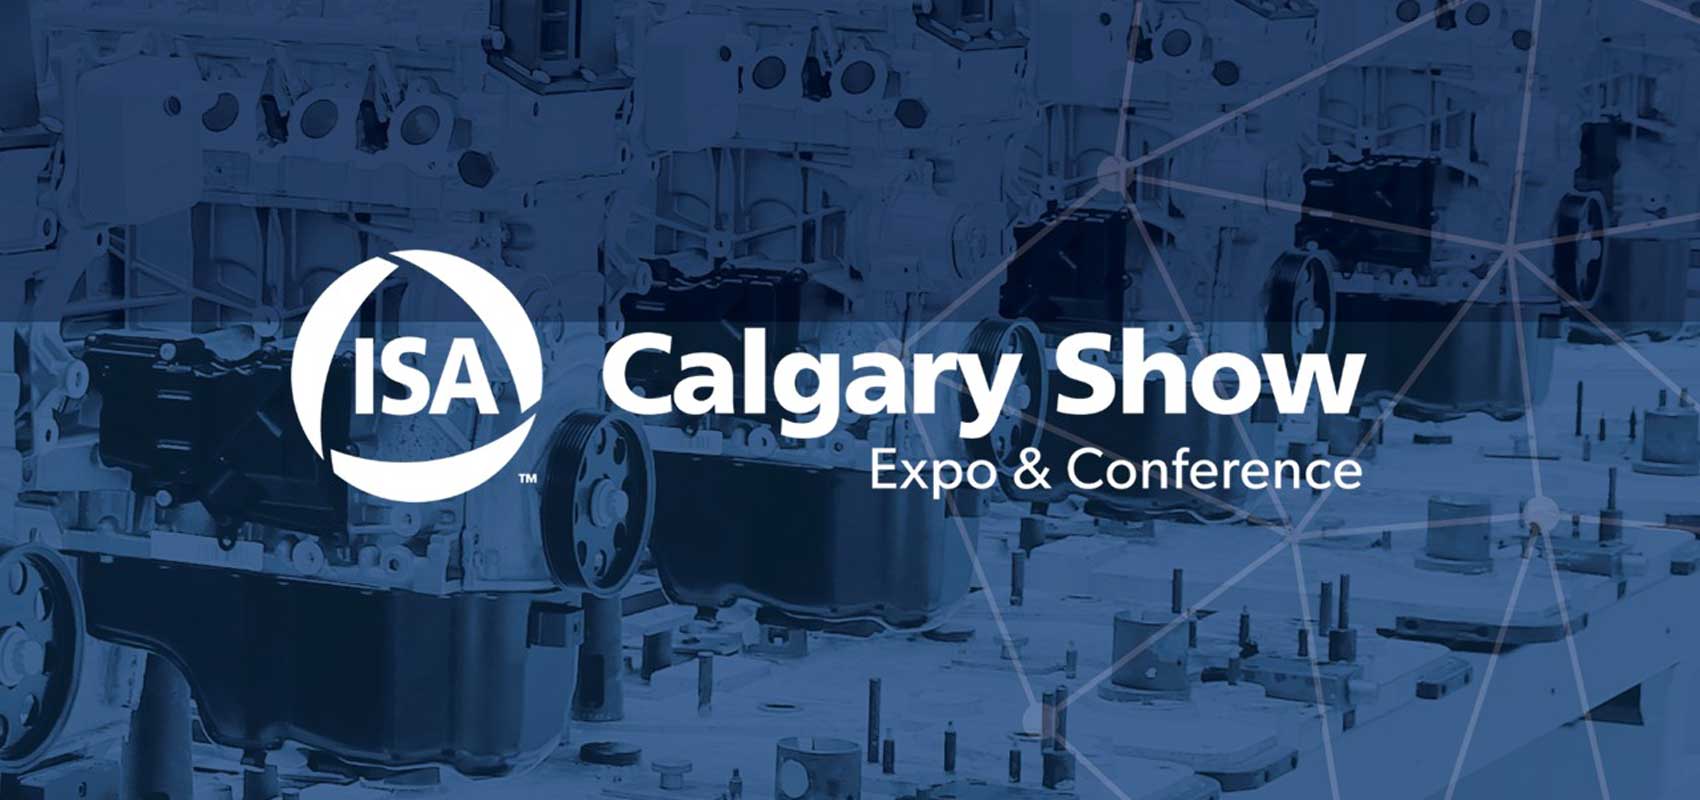 ISA Calgary Show 2021 Event Webpage Listing No Date